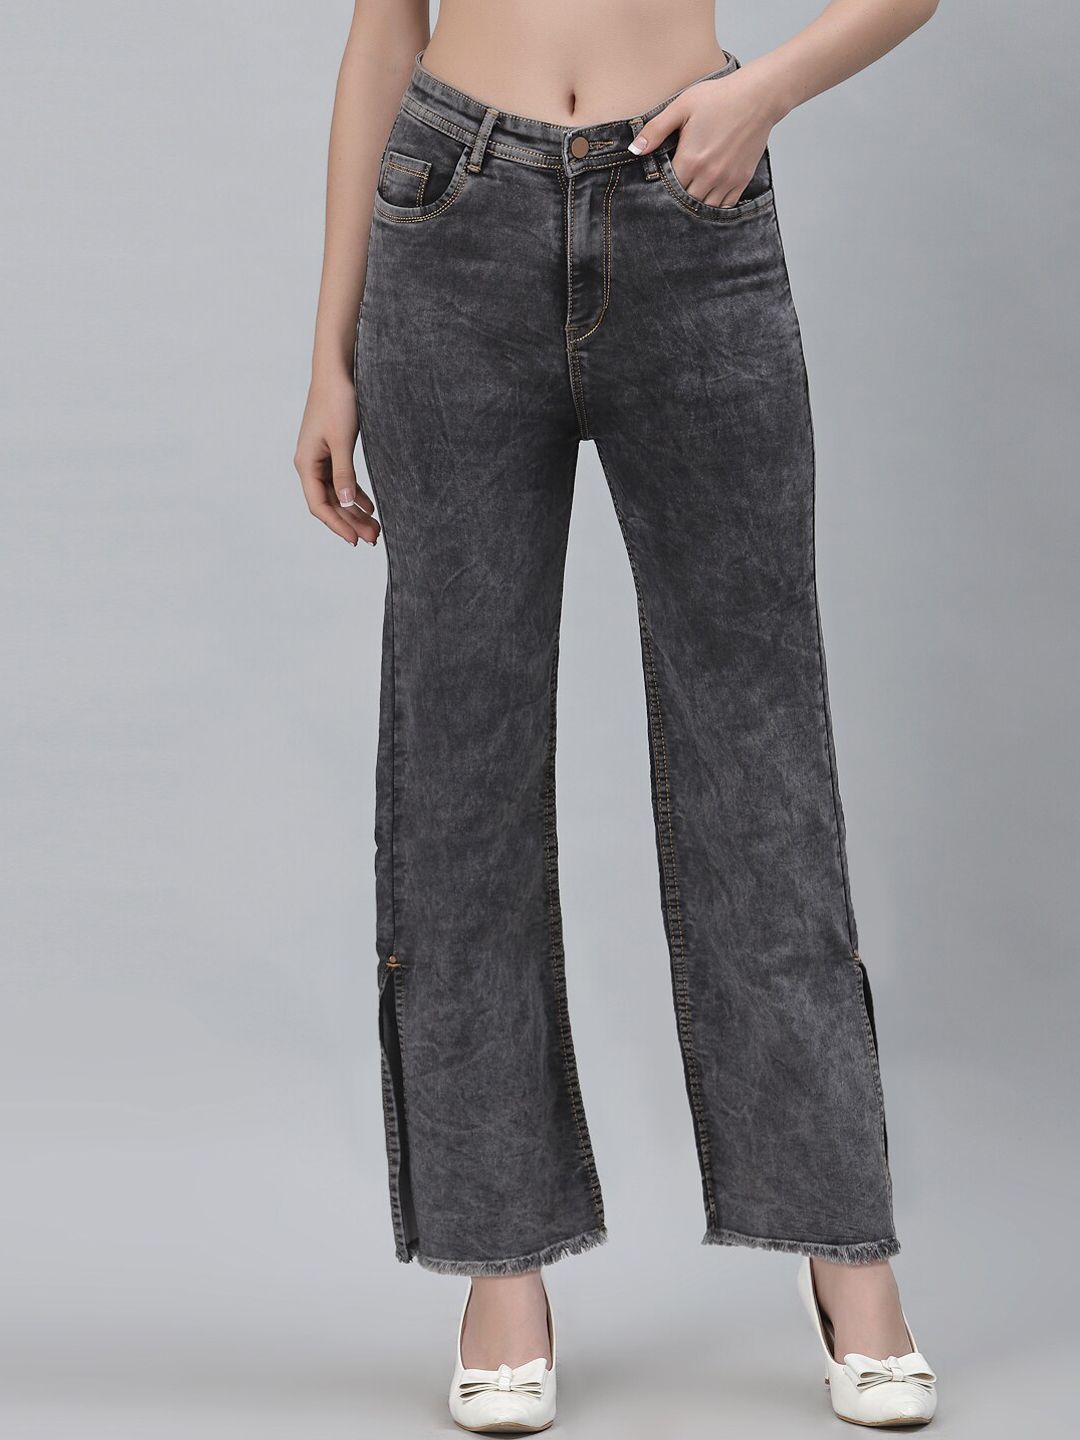 River Of Design Jeans Women Grey Wide Leg High-Rise Heavy Fade Stretchable Jeans Price in India